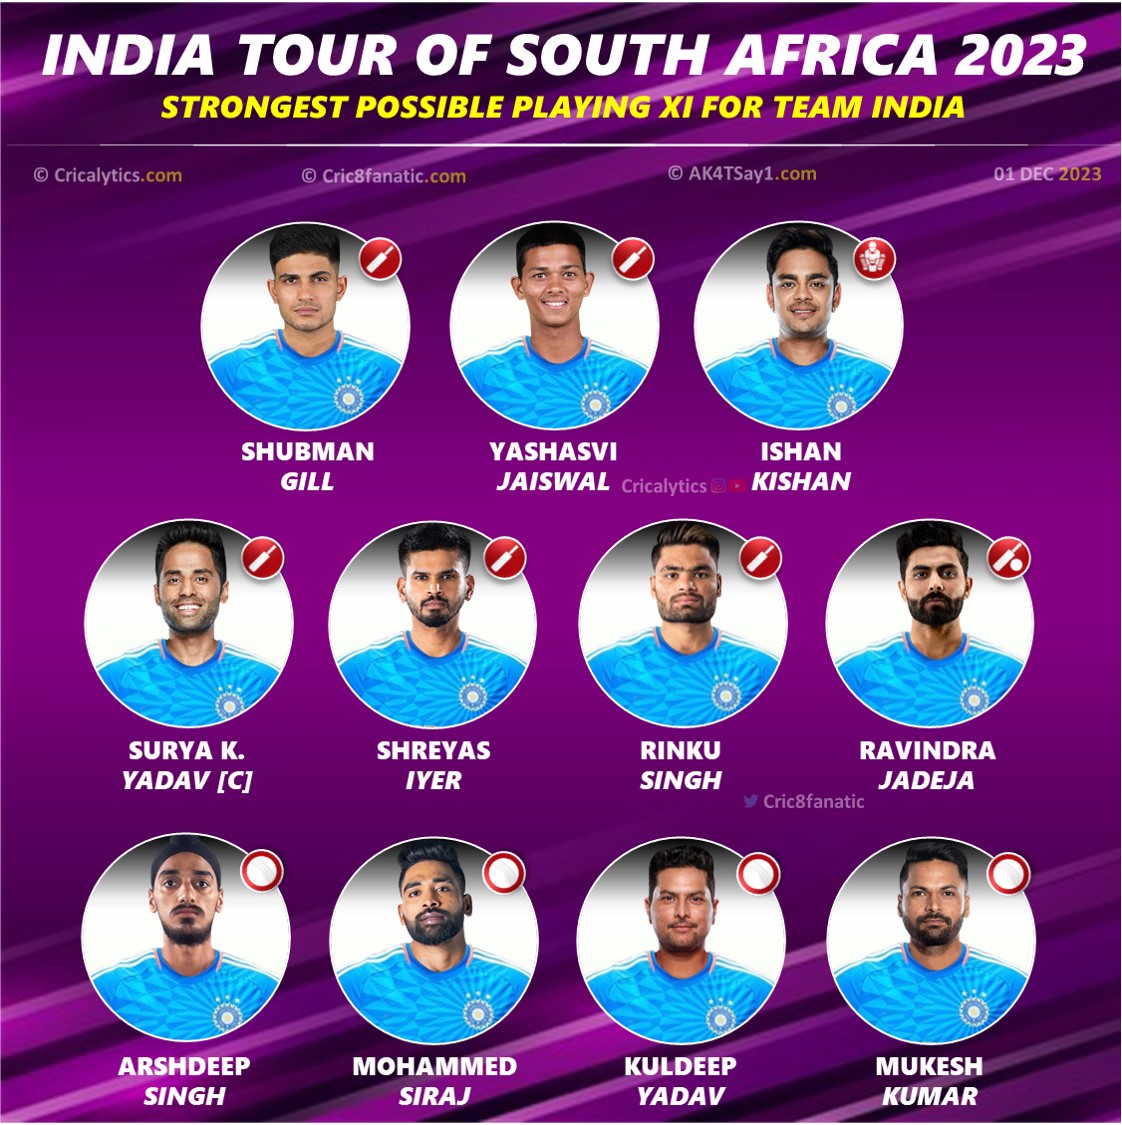 India vs South Africa 2023 T20 Playing 11 - Best Option